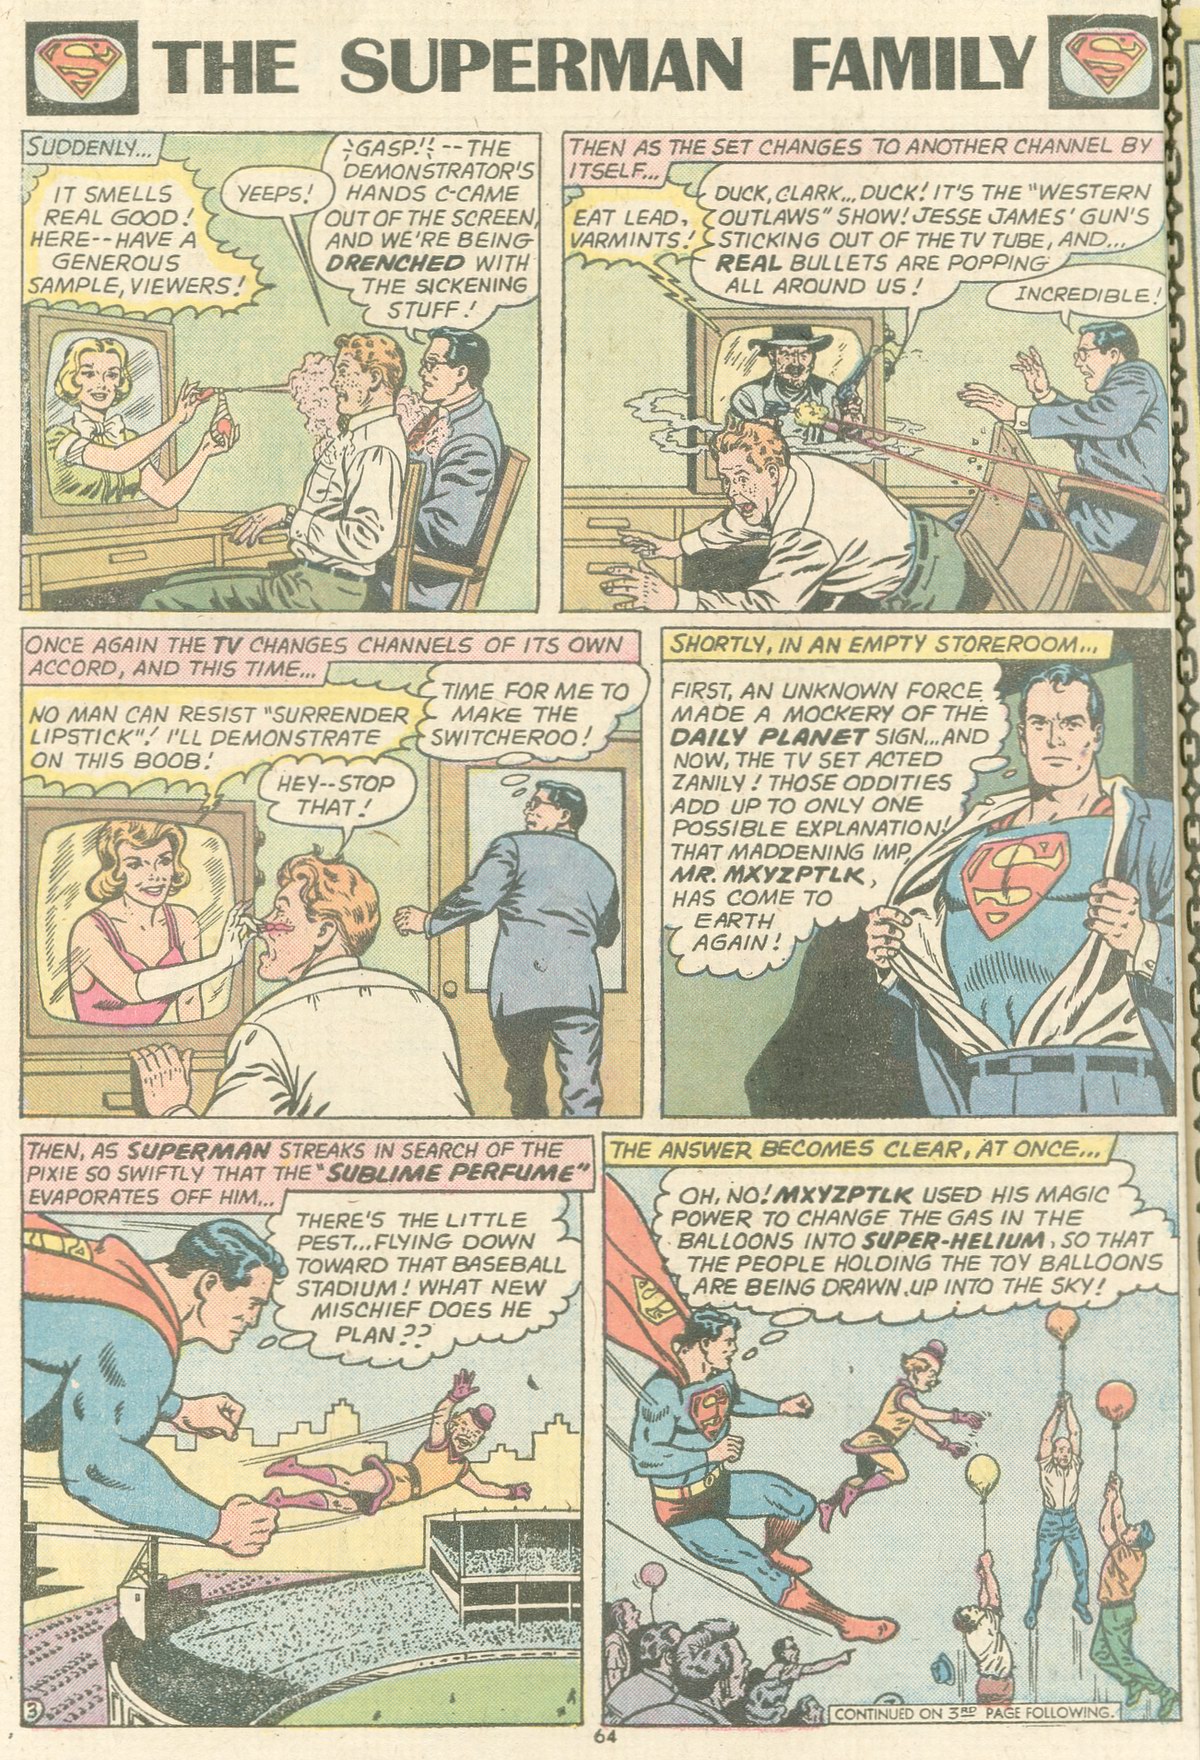 The Superman Family 168 Page 64